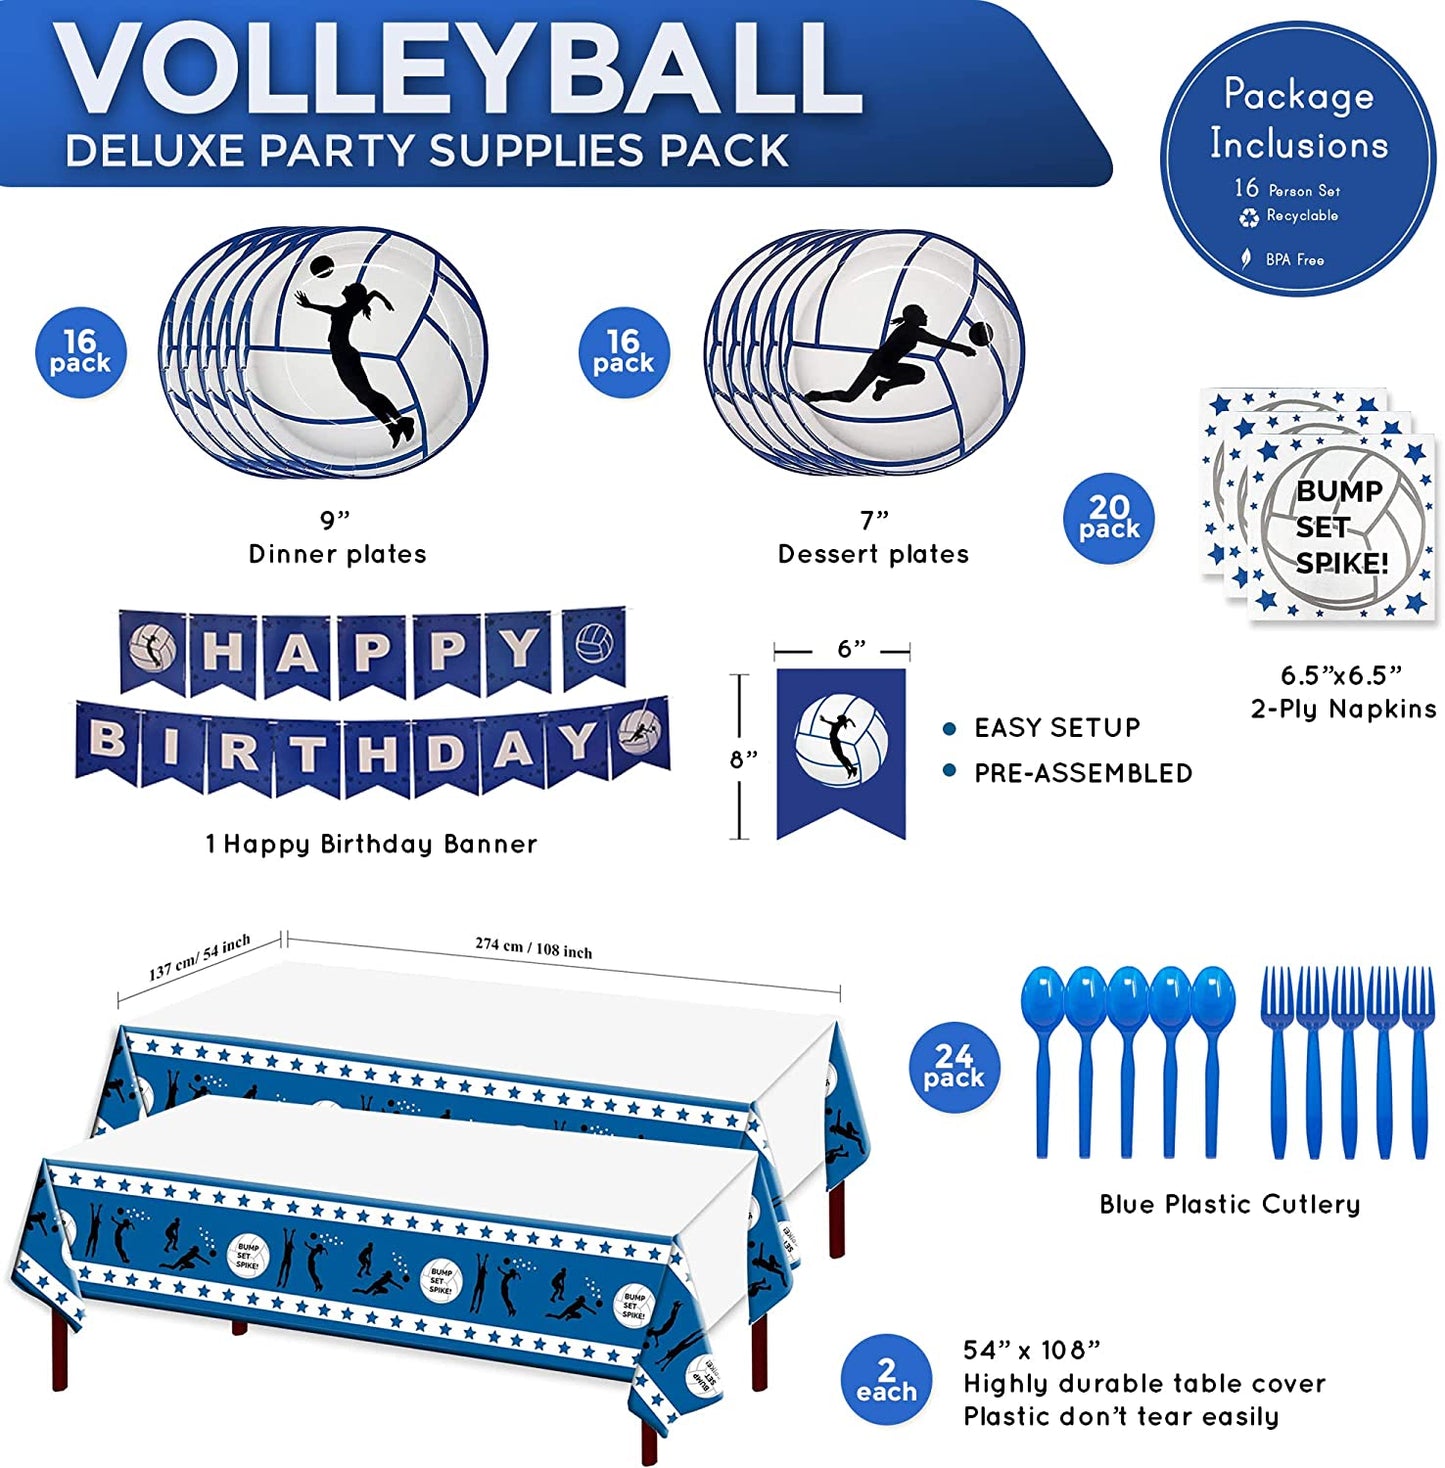 Volleyball Deluxe Party Supplies Packs (For 16 Guests)